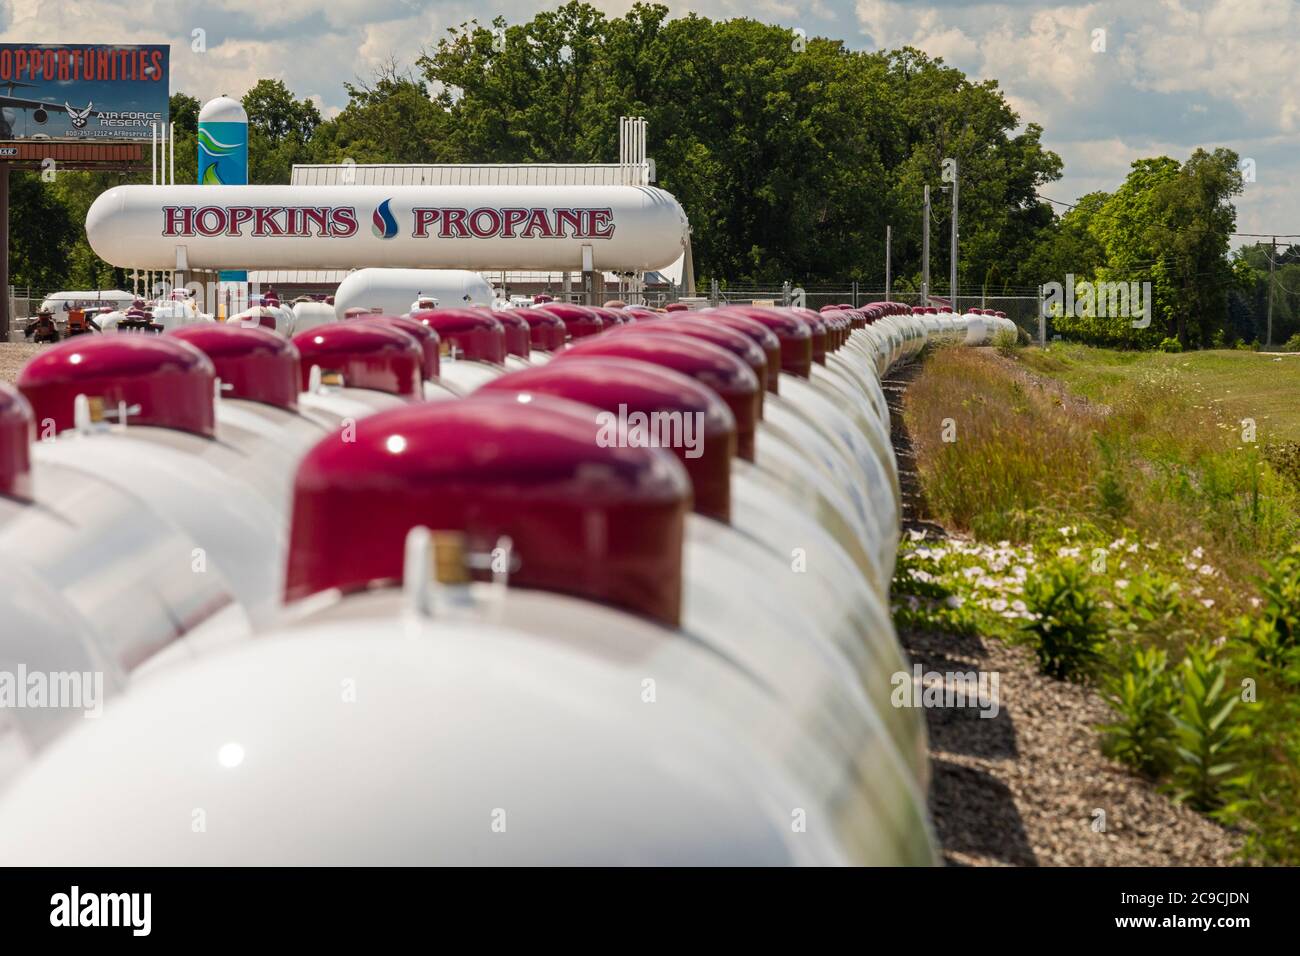 Shelbyville, Michigan - Propane tanks stored at a propane supplier in rural Michigan. Stock Photo